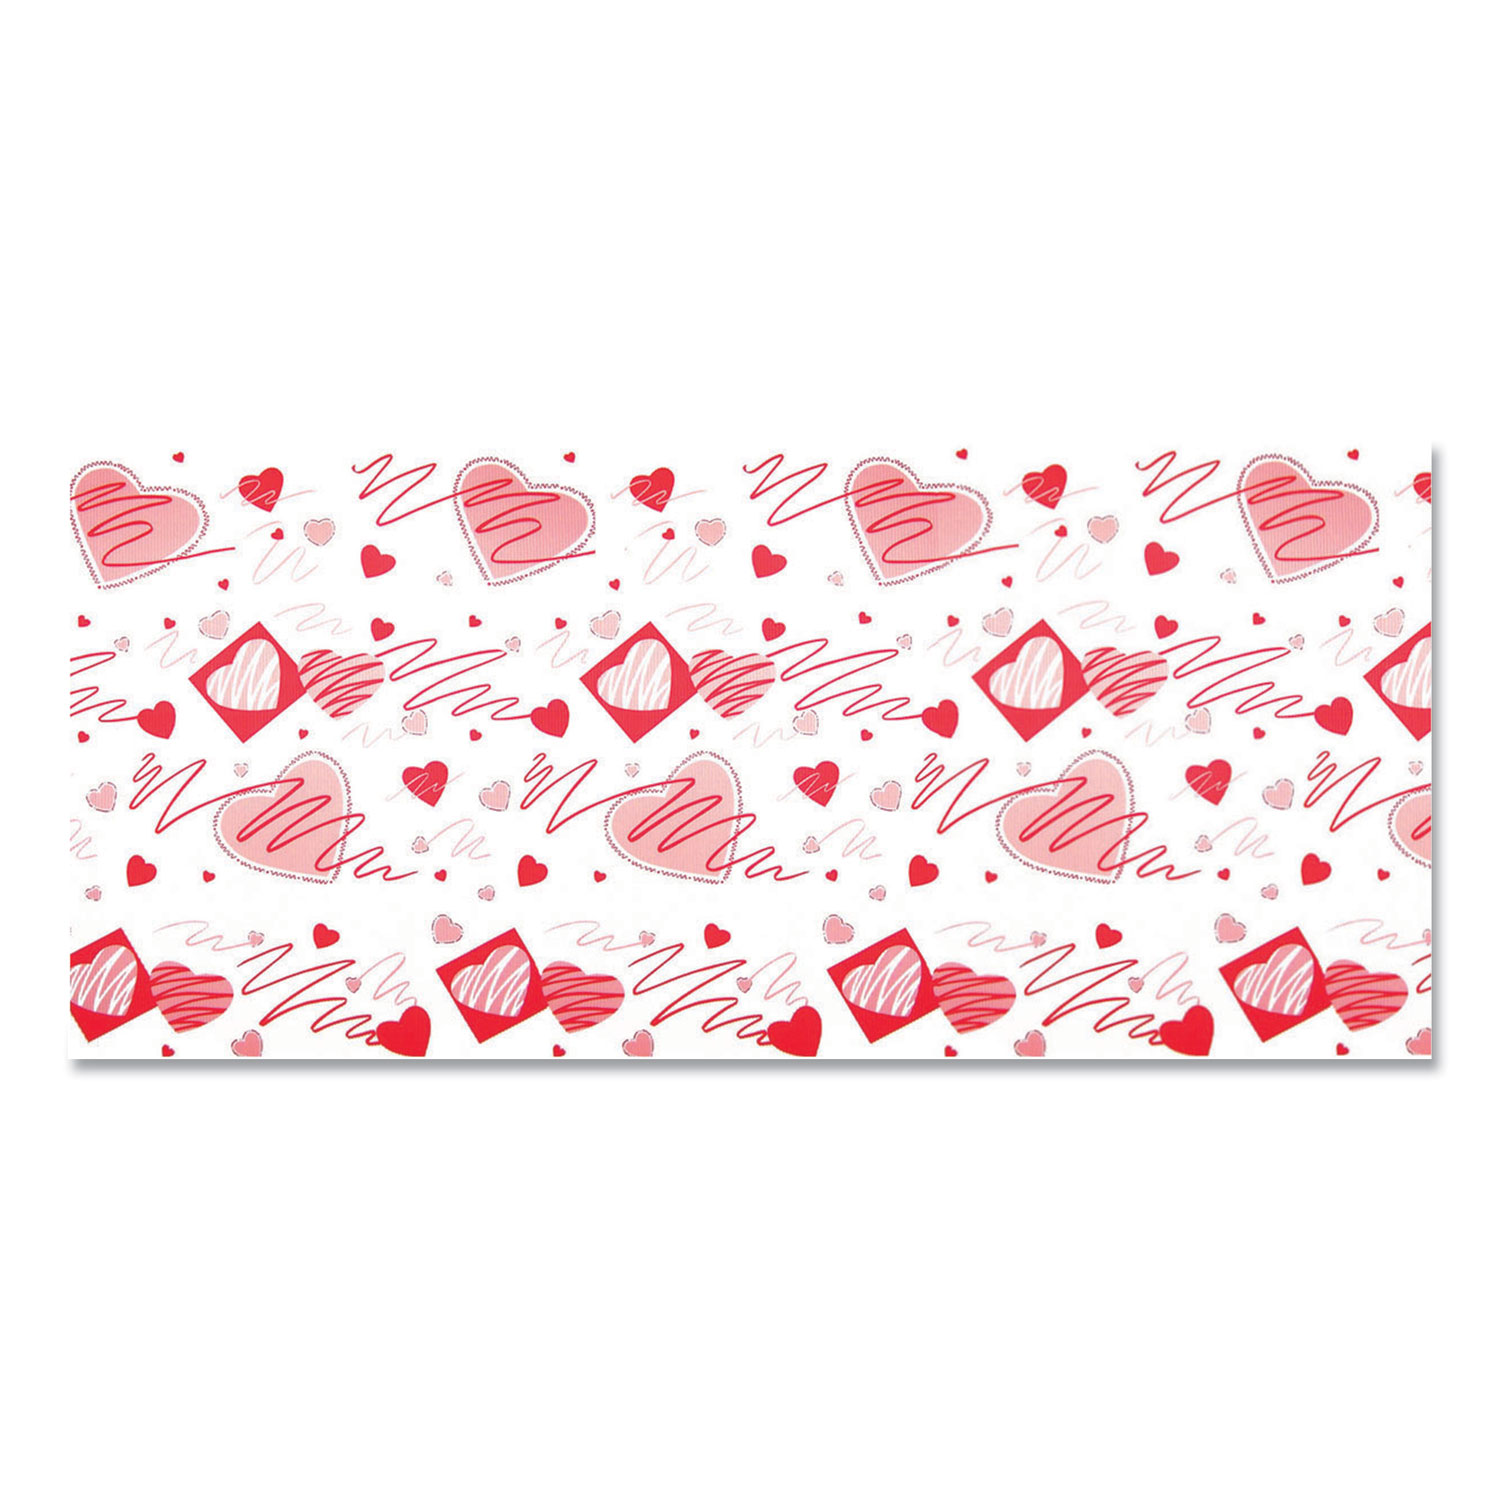 Pacon® Corobuff Corrugated Paper Roll, 48 x 25 ft, Valentine Hearts